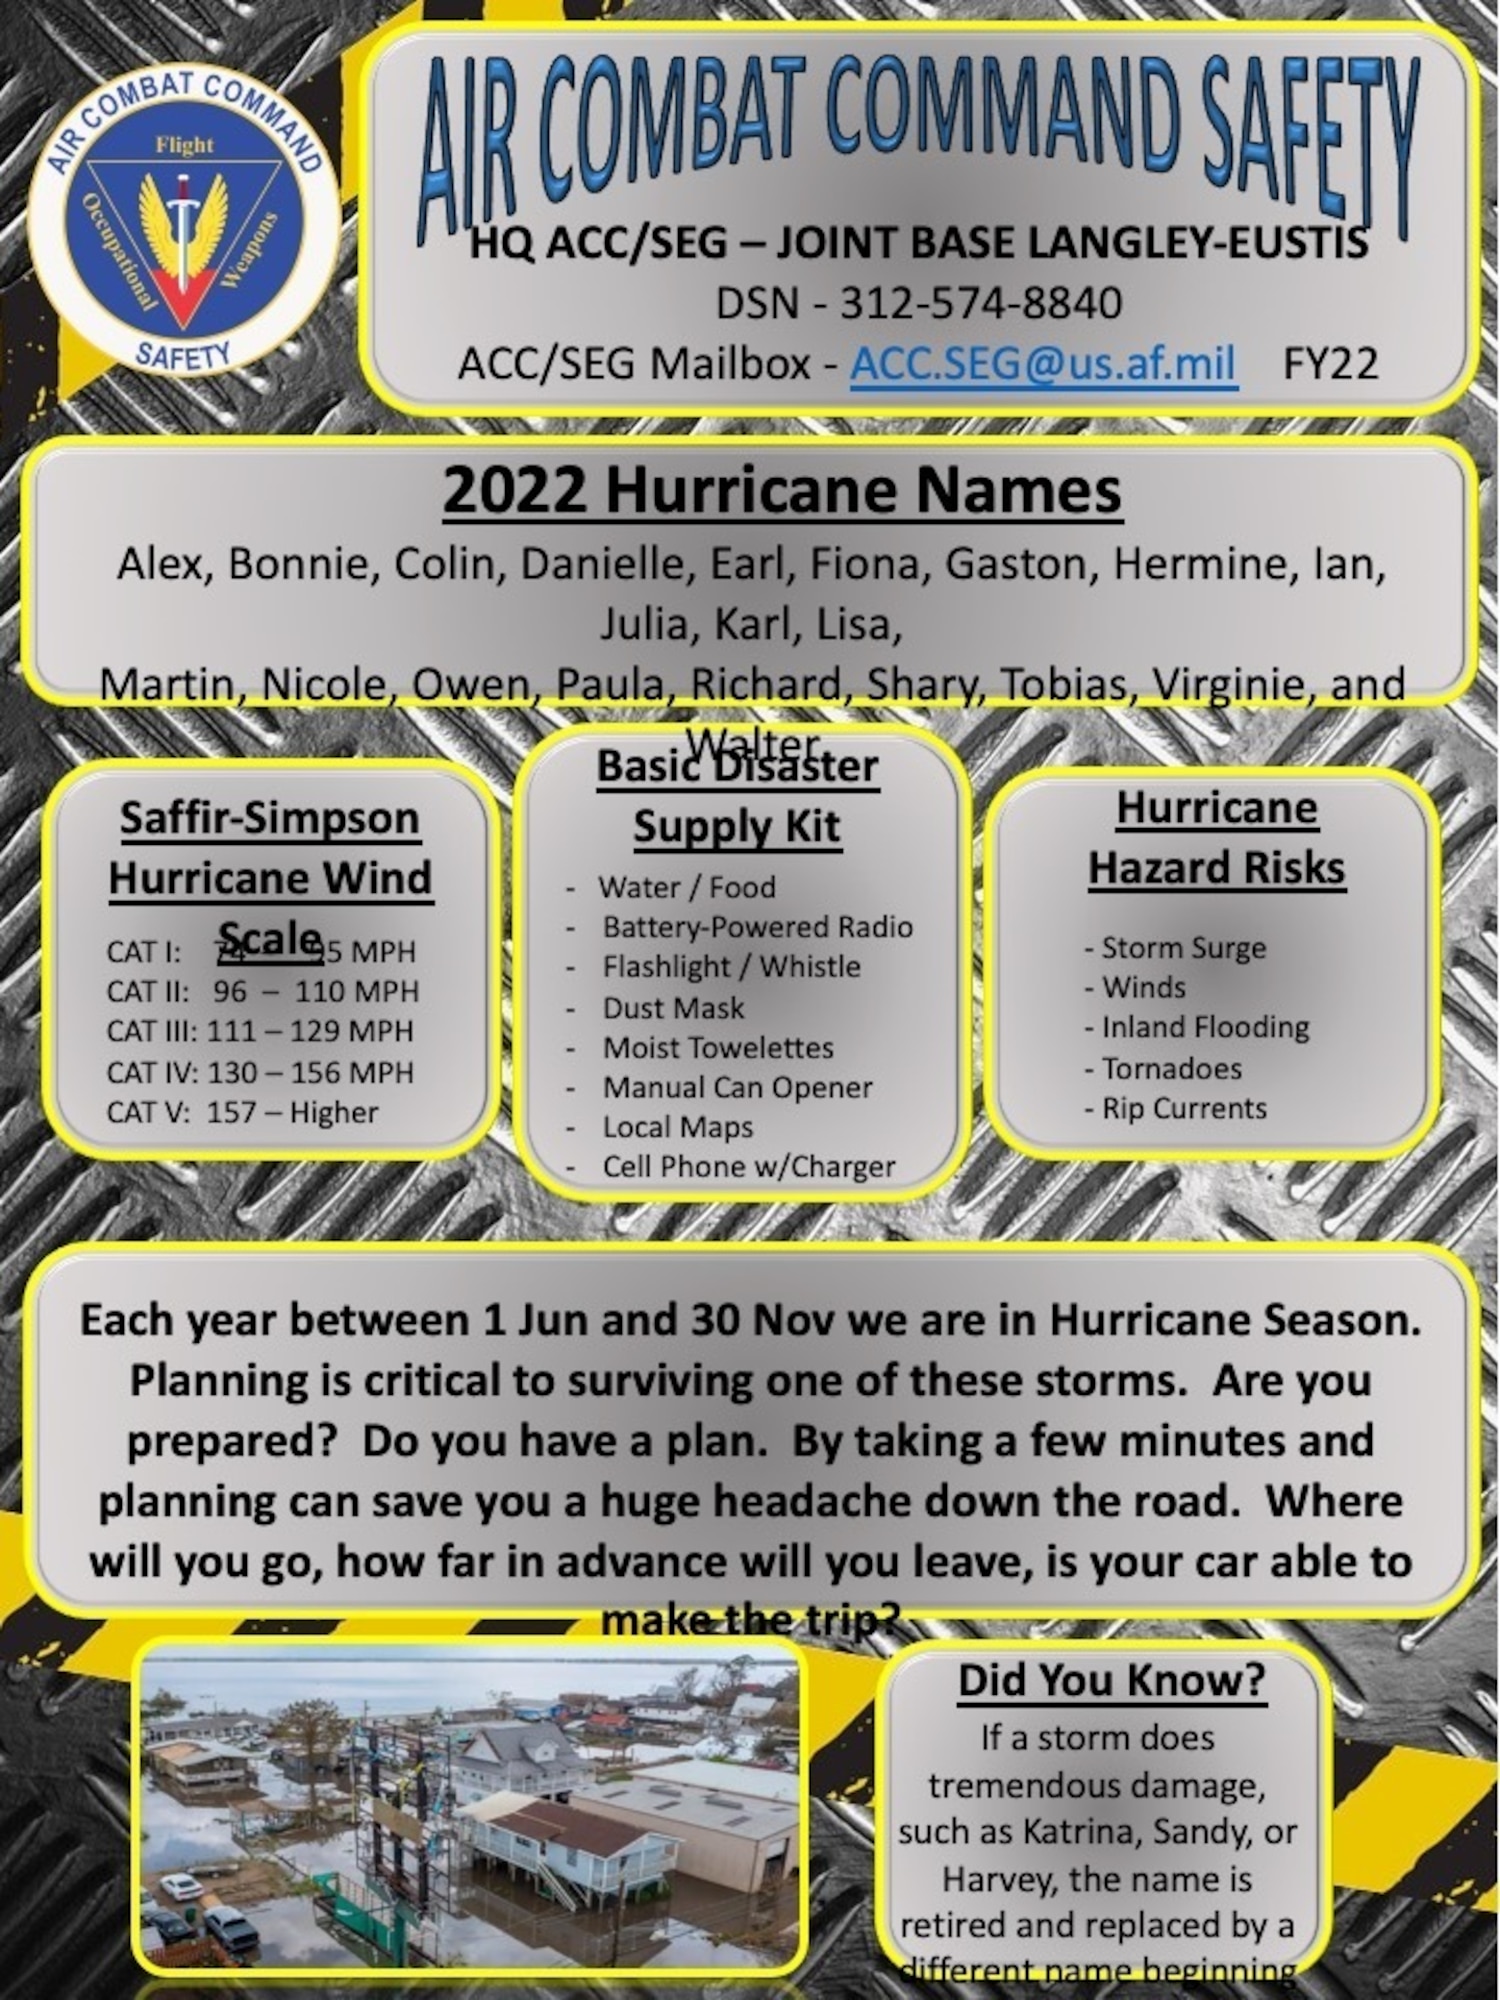 Seymour safety this summer hurricane safety ACC